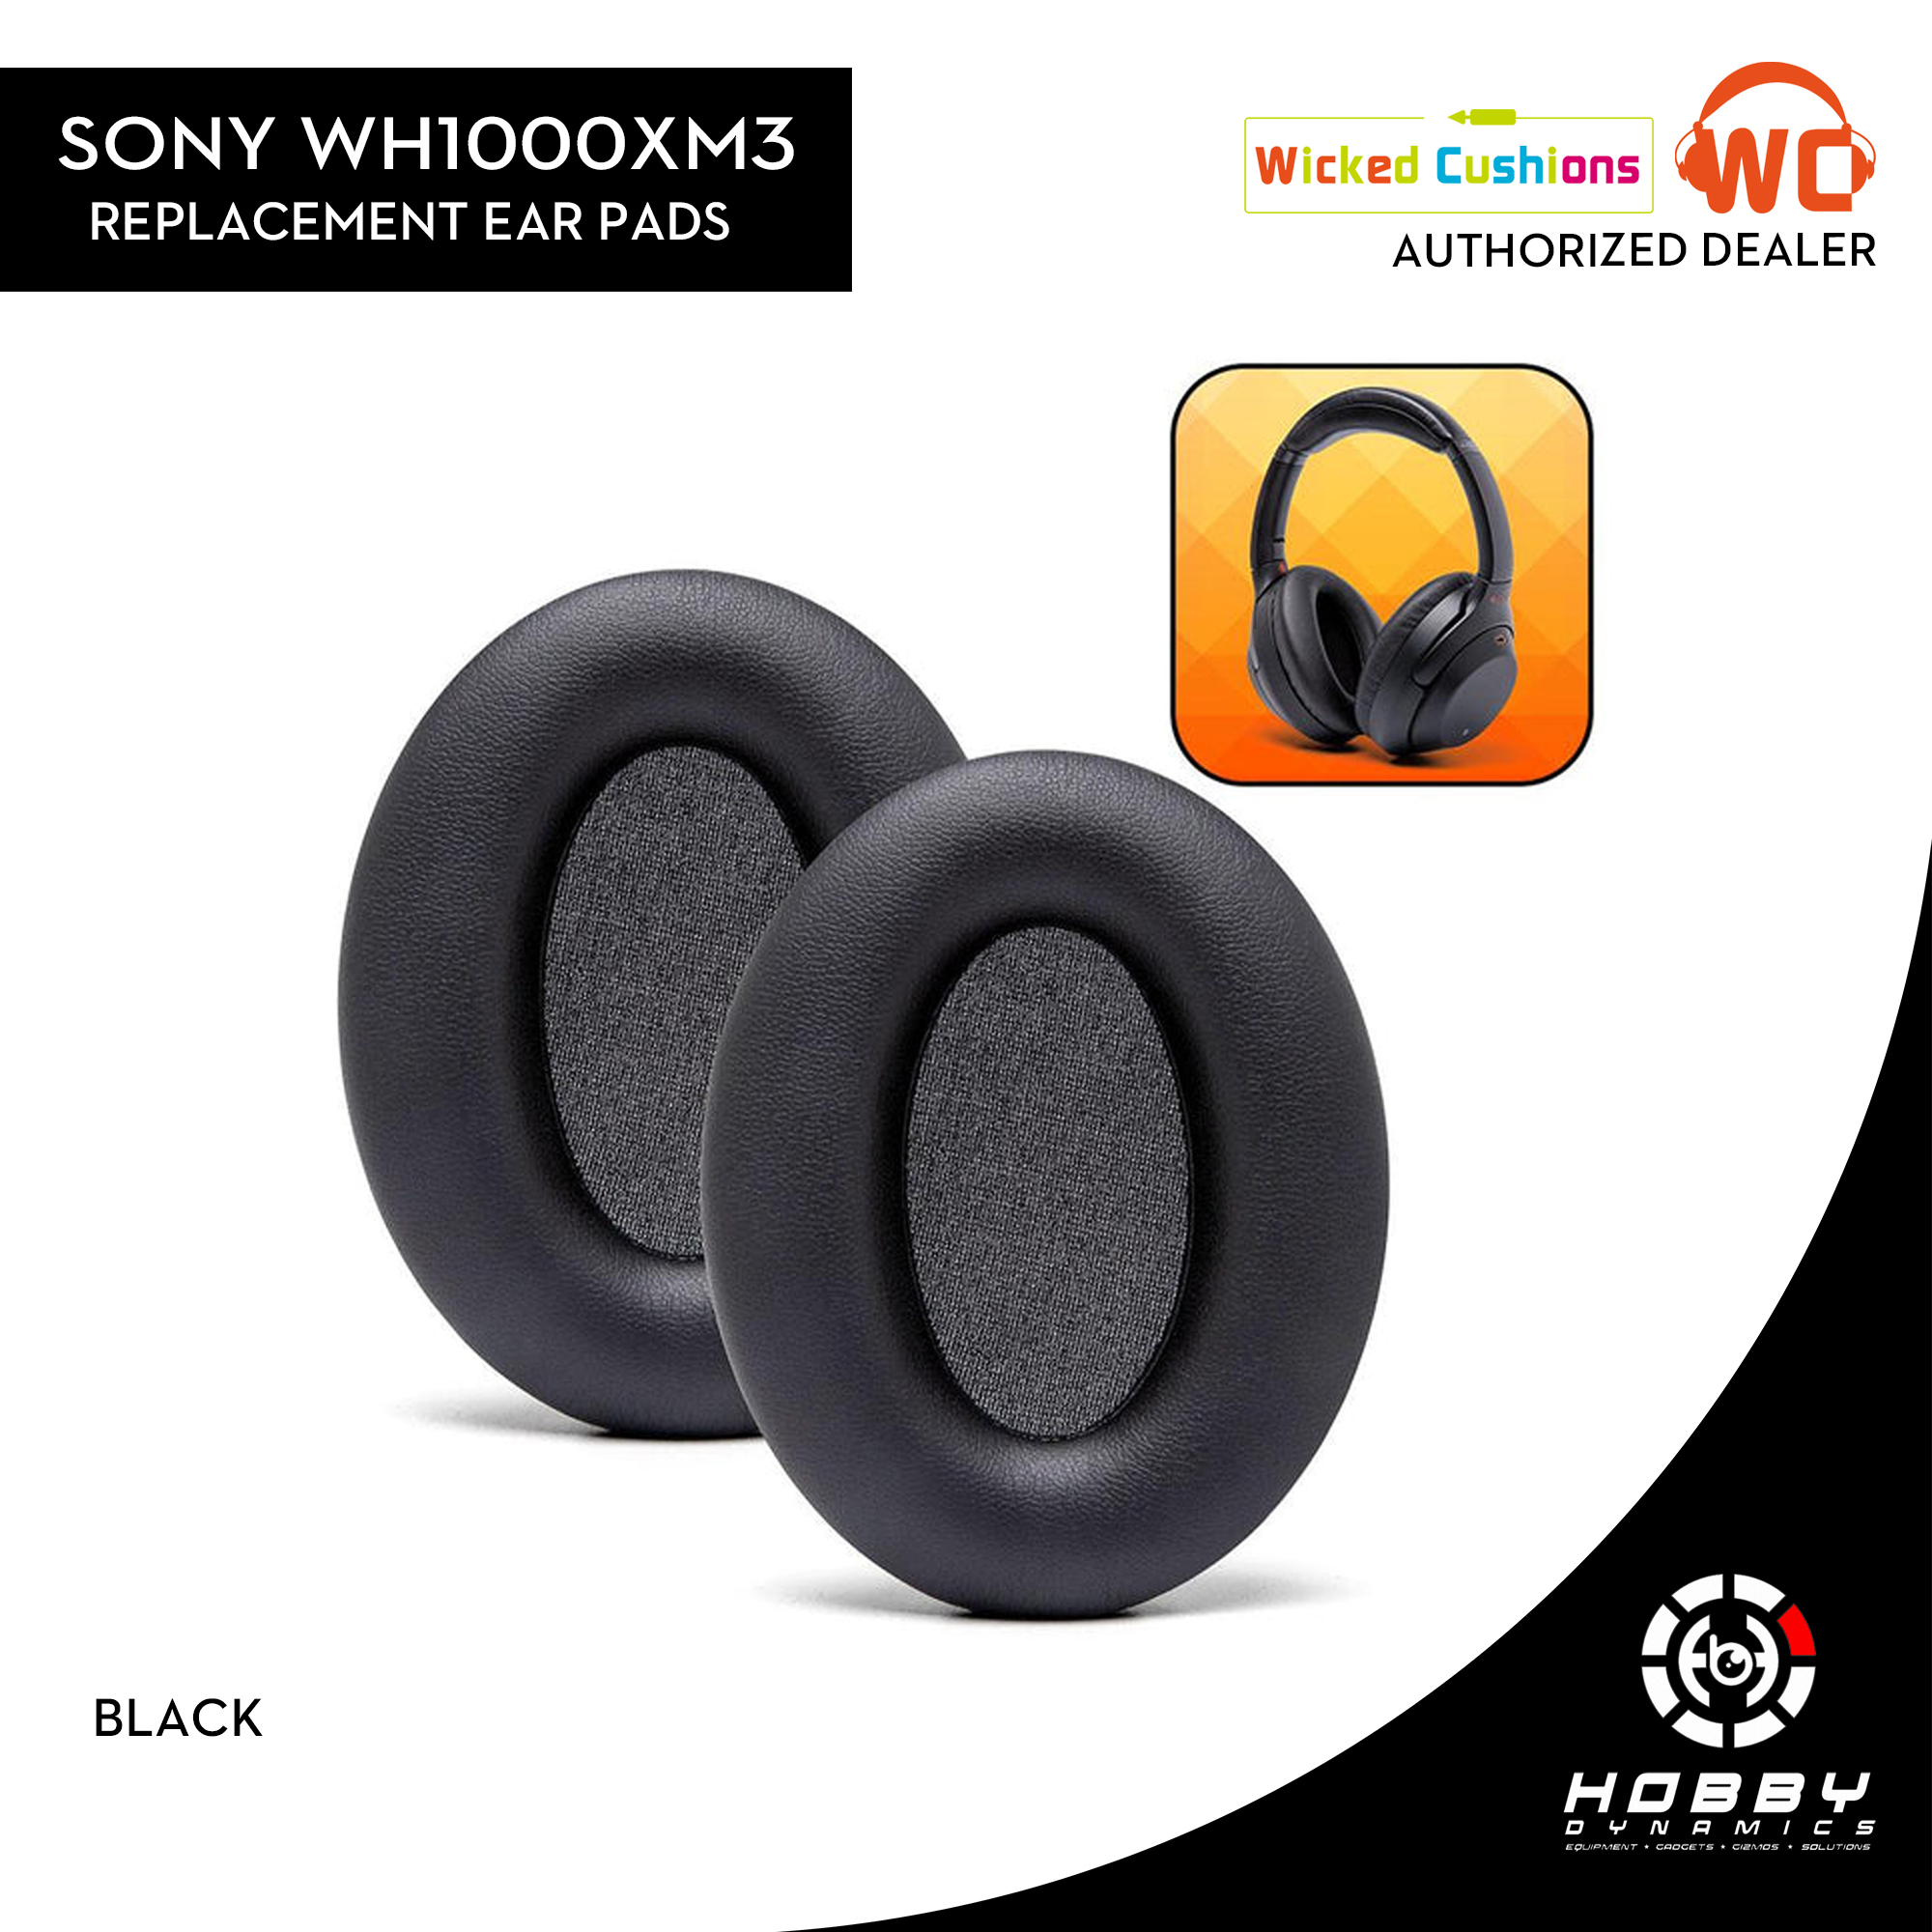 Sony WH1000XM3 Replacement Ear Pads By Wicked Cushions